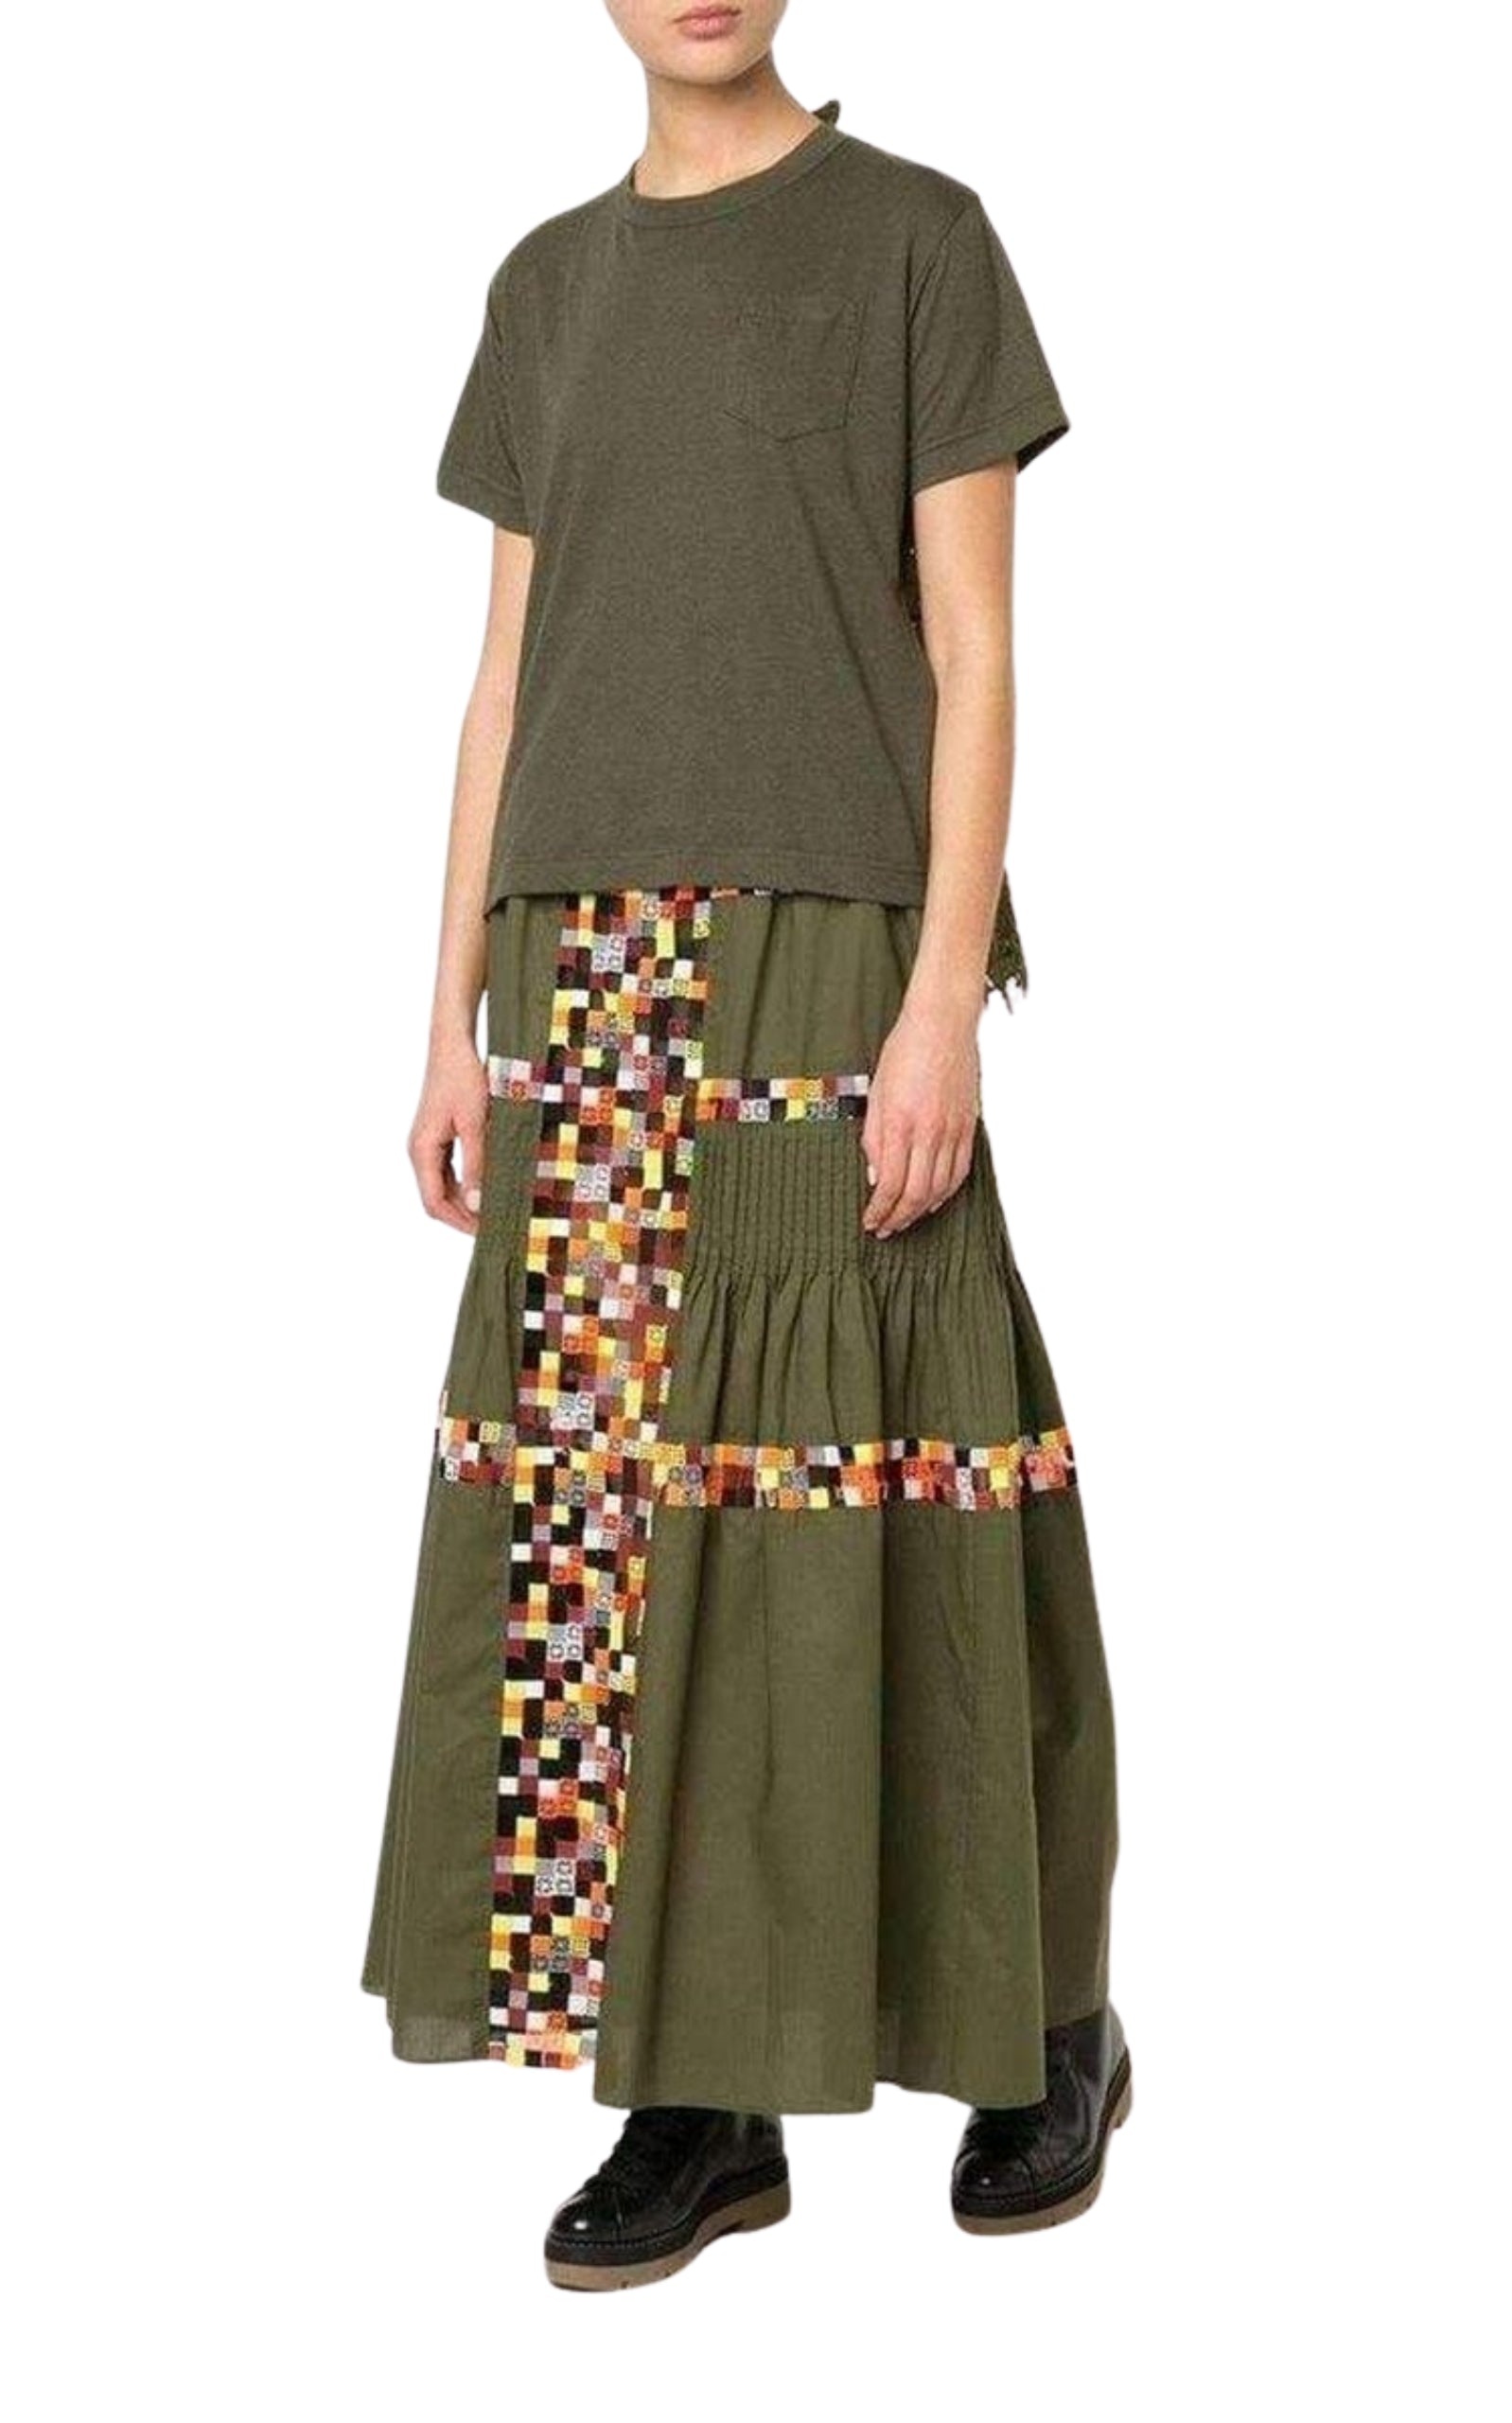 Military Green Embroidered Long Skirt - 2